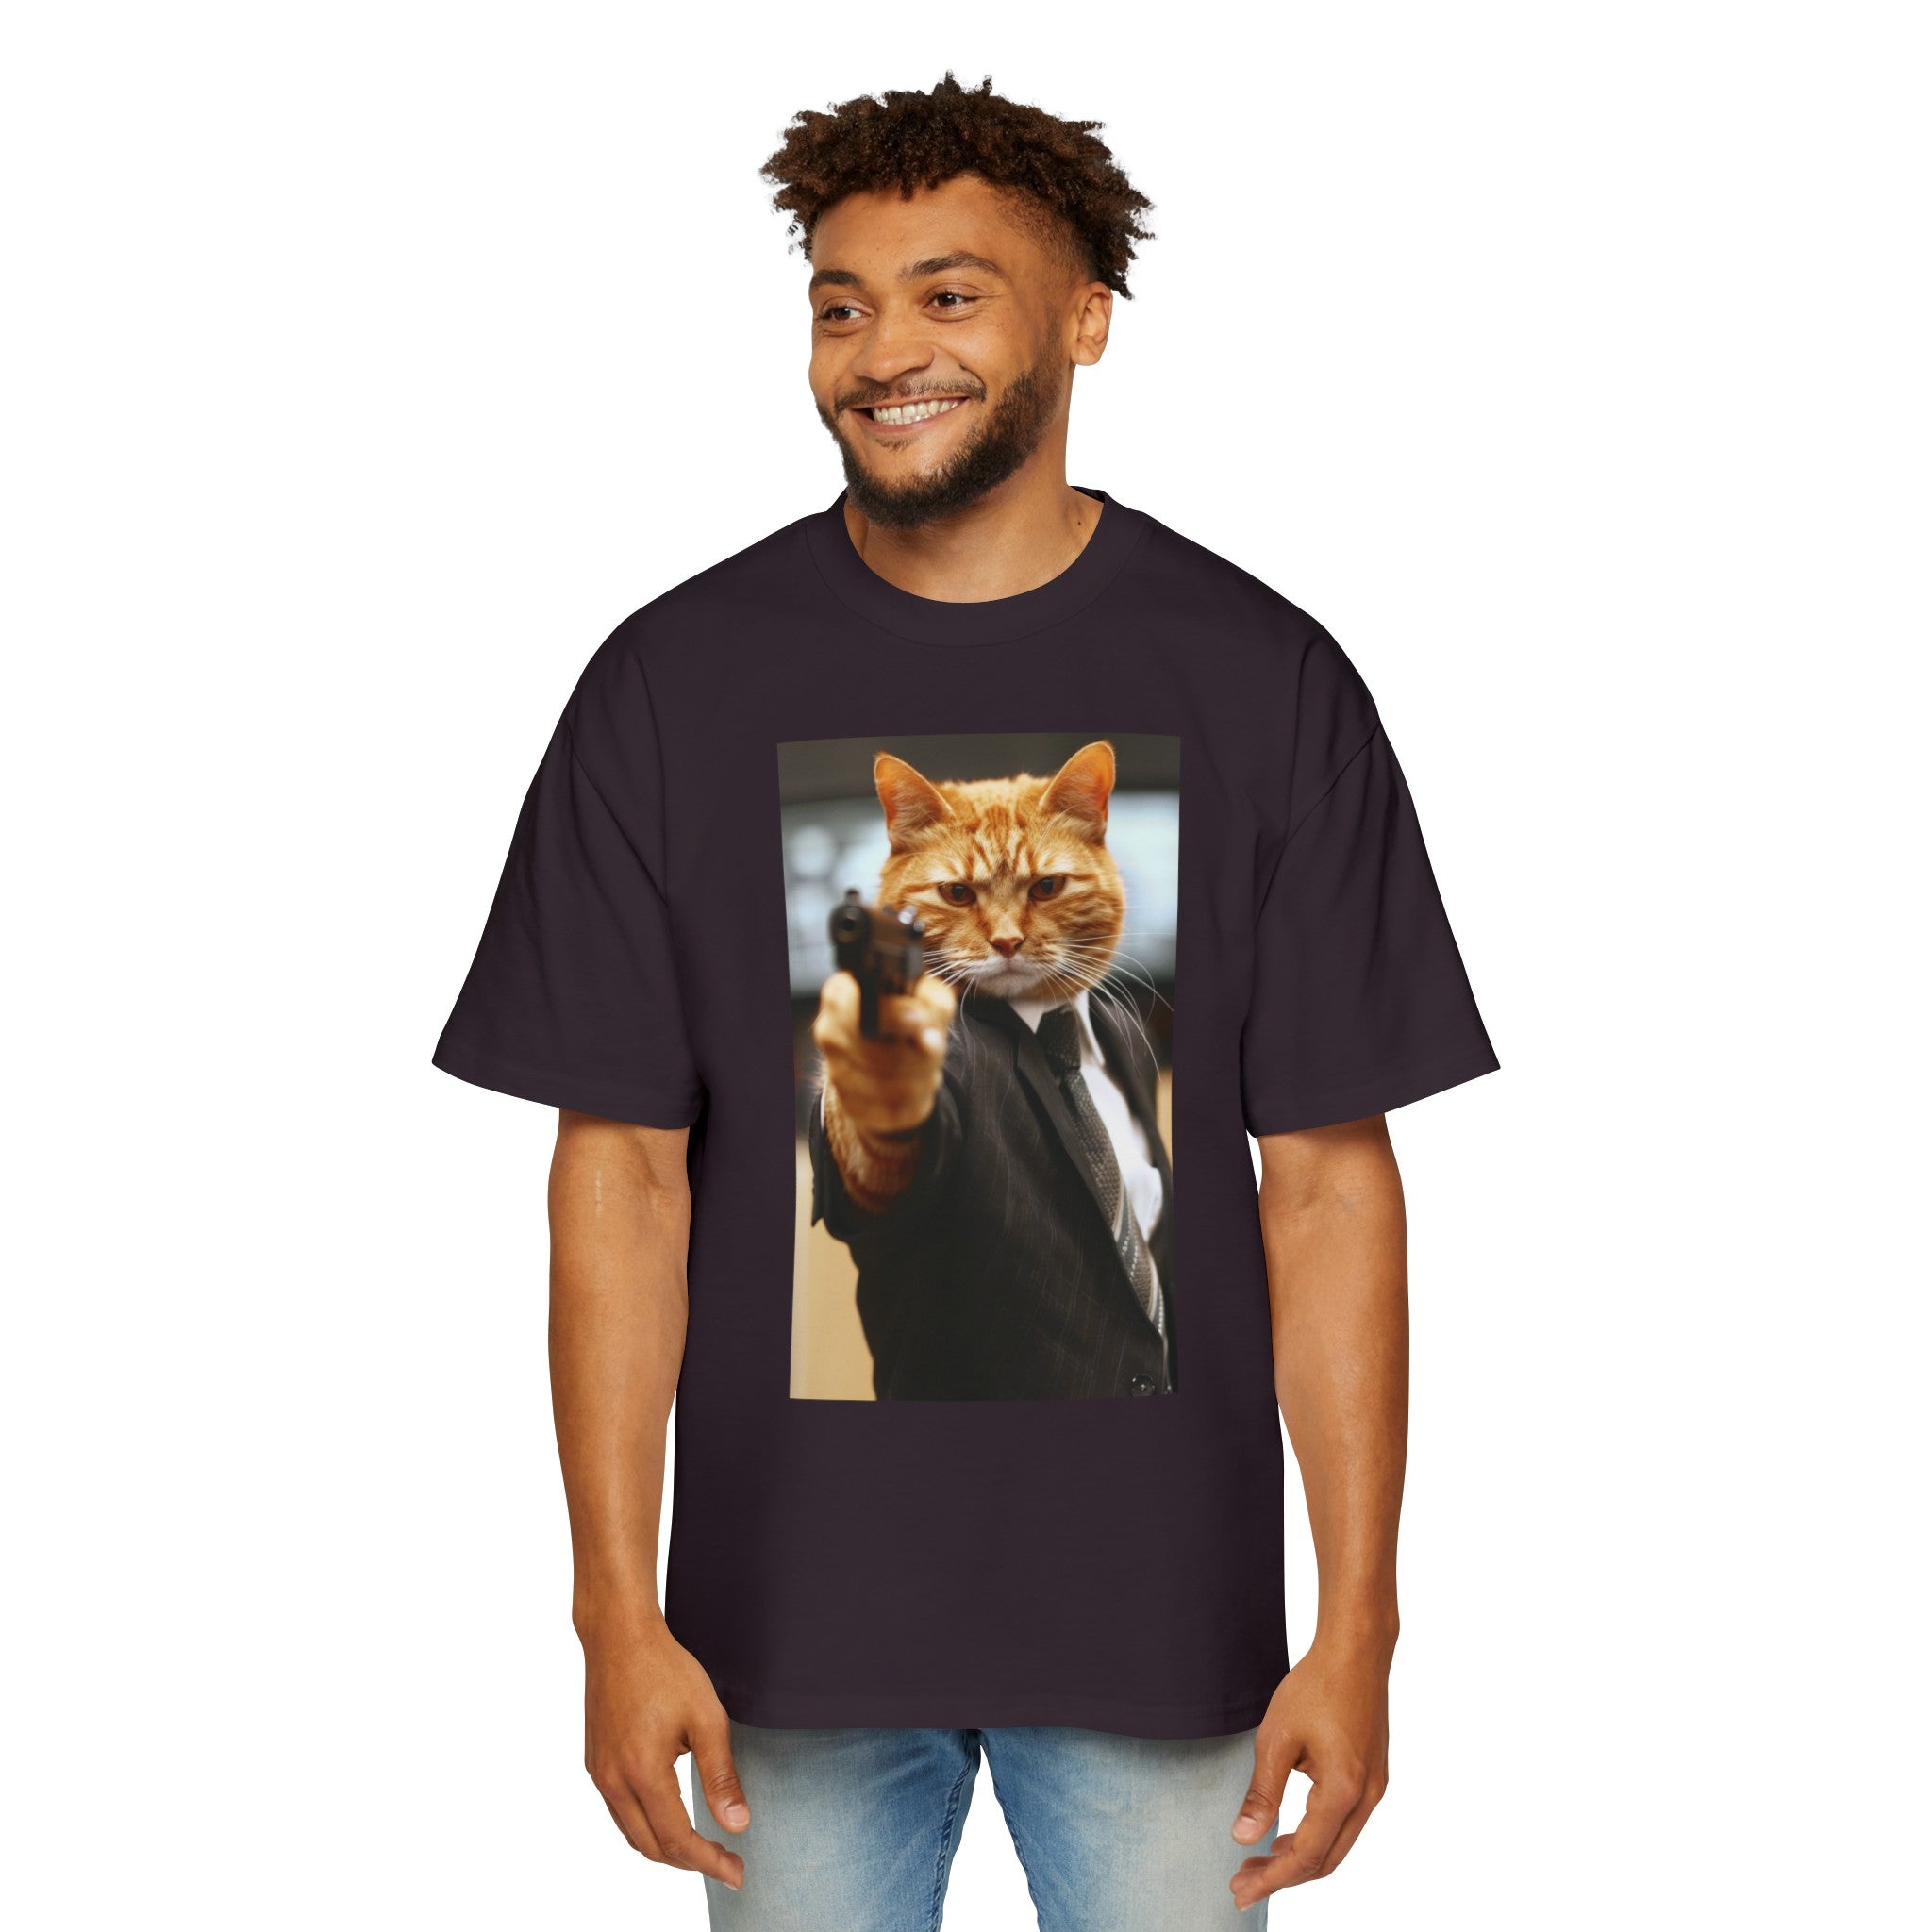 The image showcases a stylish men's heavy oversized tee in a dark color, enhancing the vivid Hitman Cat graphic. The tee's relaxed fit is visible, promising comfort and style. The design is eye-catching and humorous, perfect for those who like their fashion to come with a story.